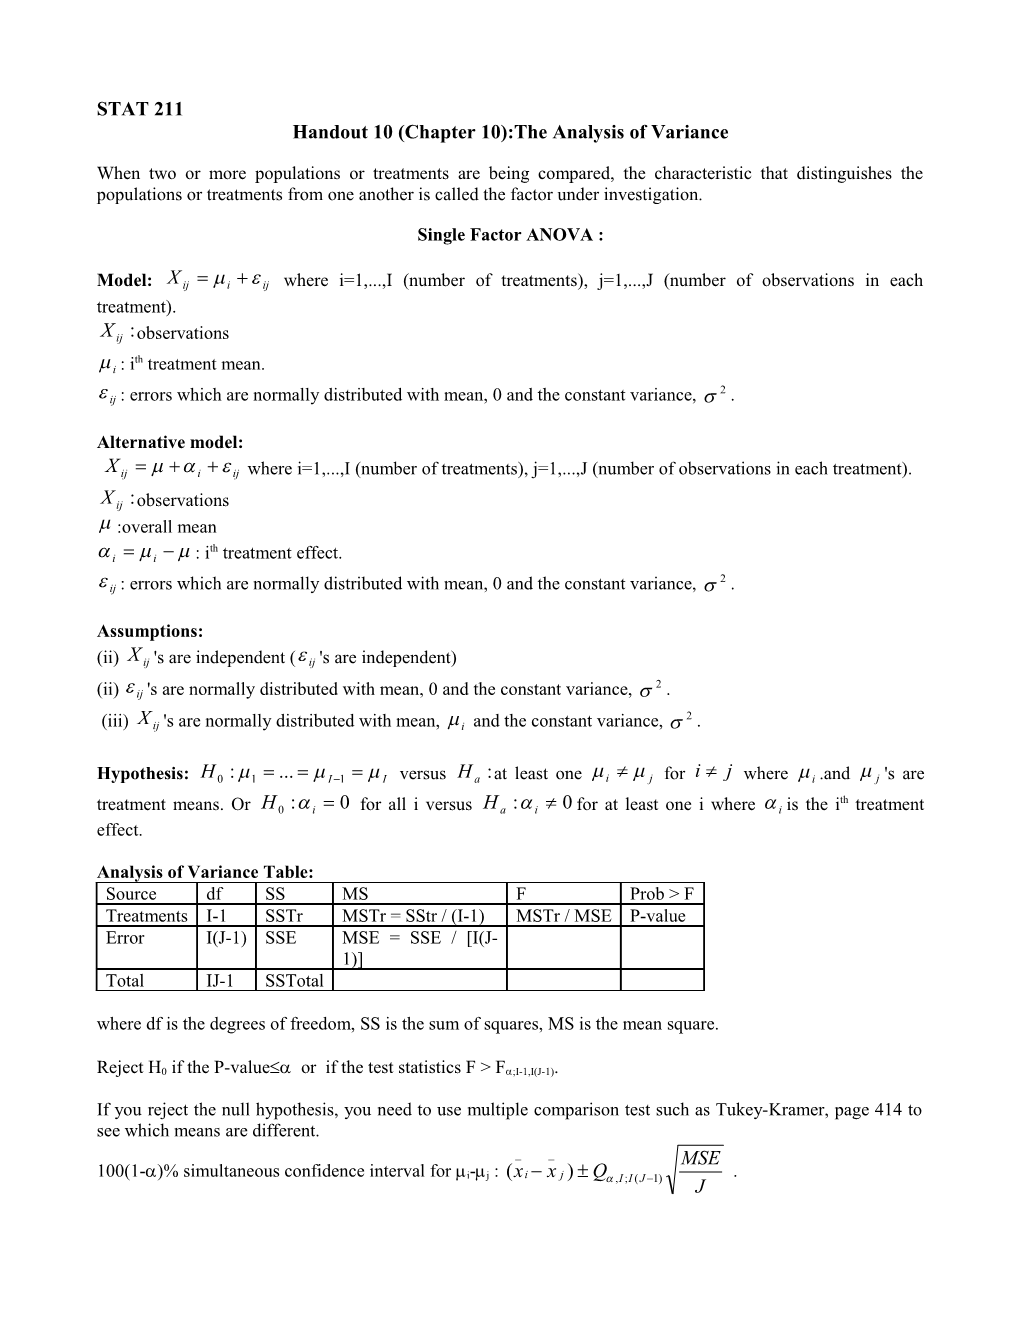 Handout 10 (Chapter 10):The Analysis of Variance